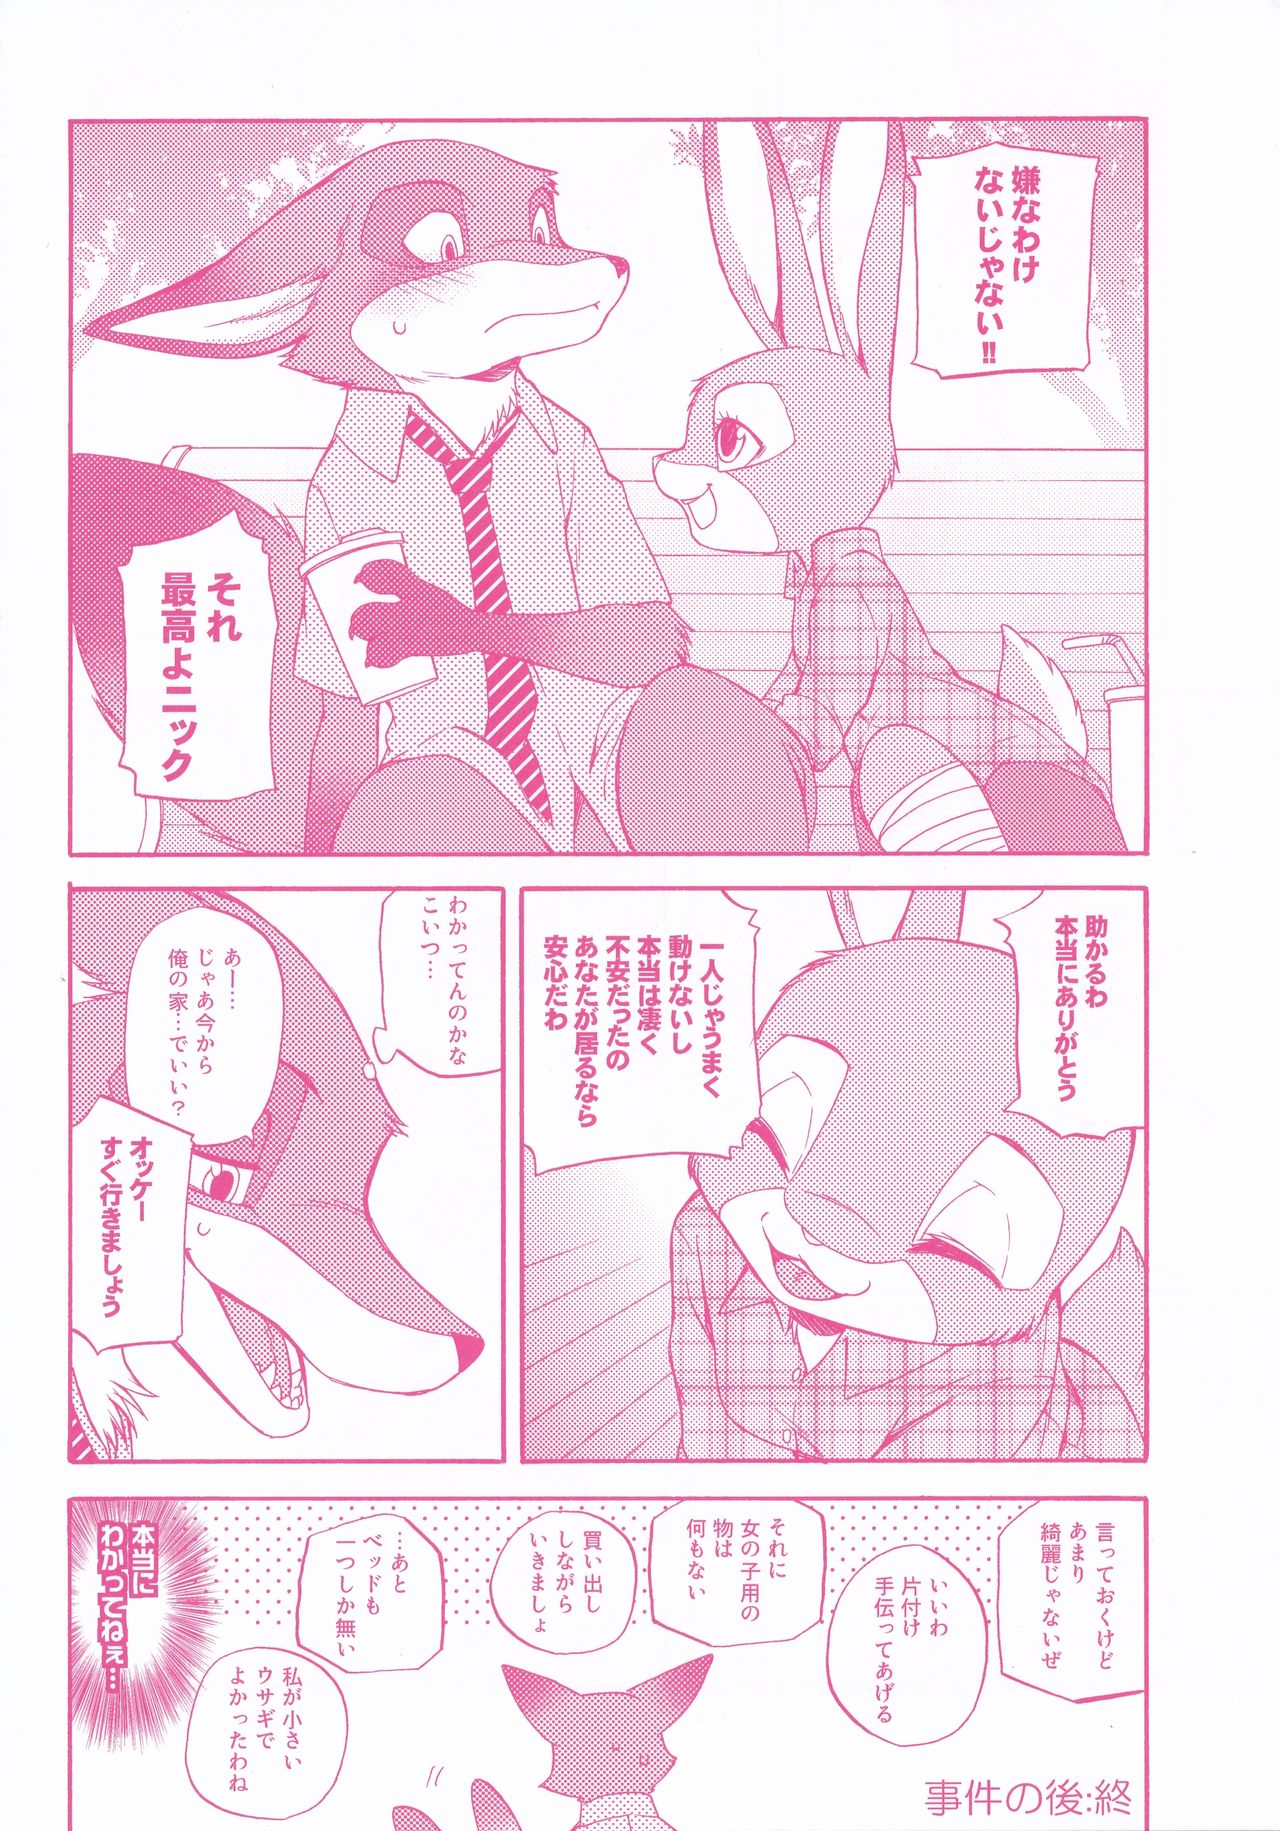 (C90) [Dogear (Inumimi Moeta)] You know you love me? (Zootopia) (C90) [Dogear (犬耳もえ太)] You know you love me? (ズートピア)